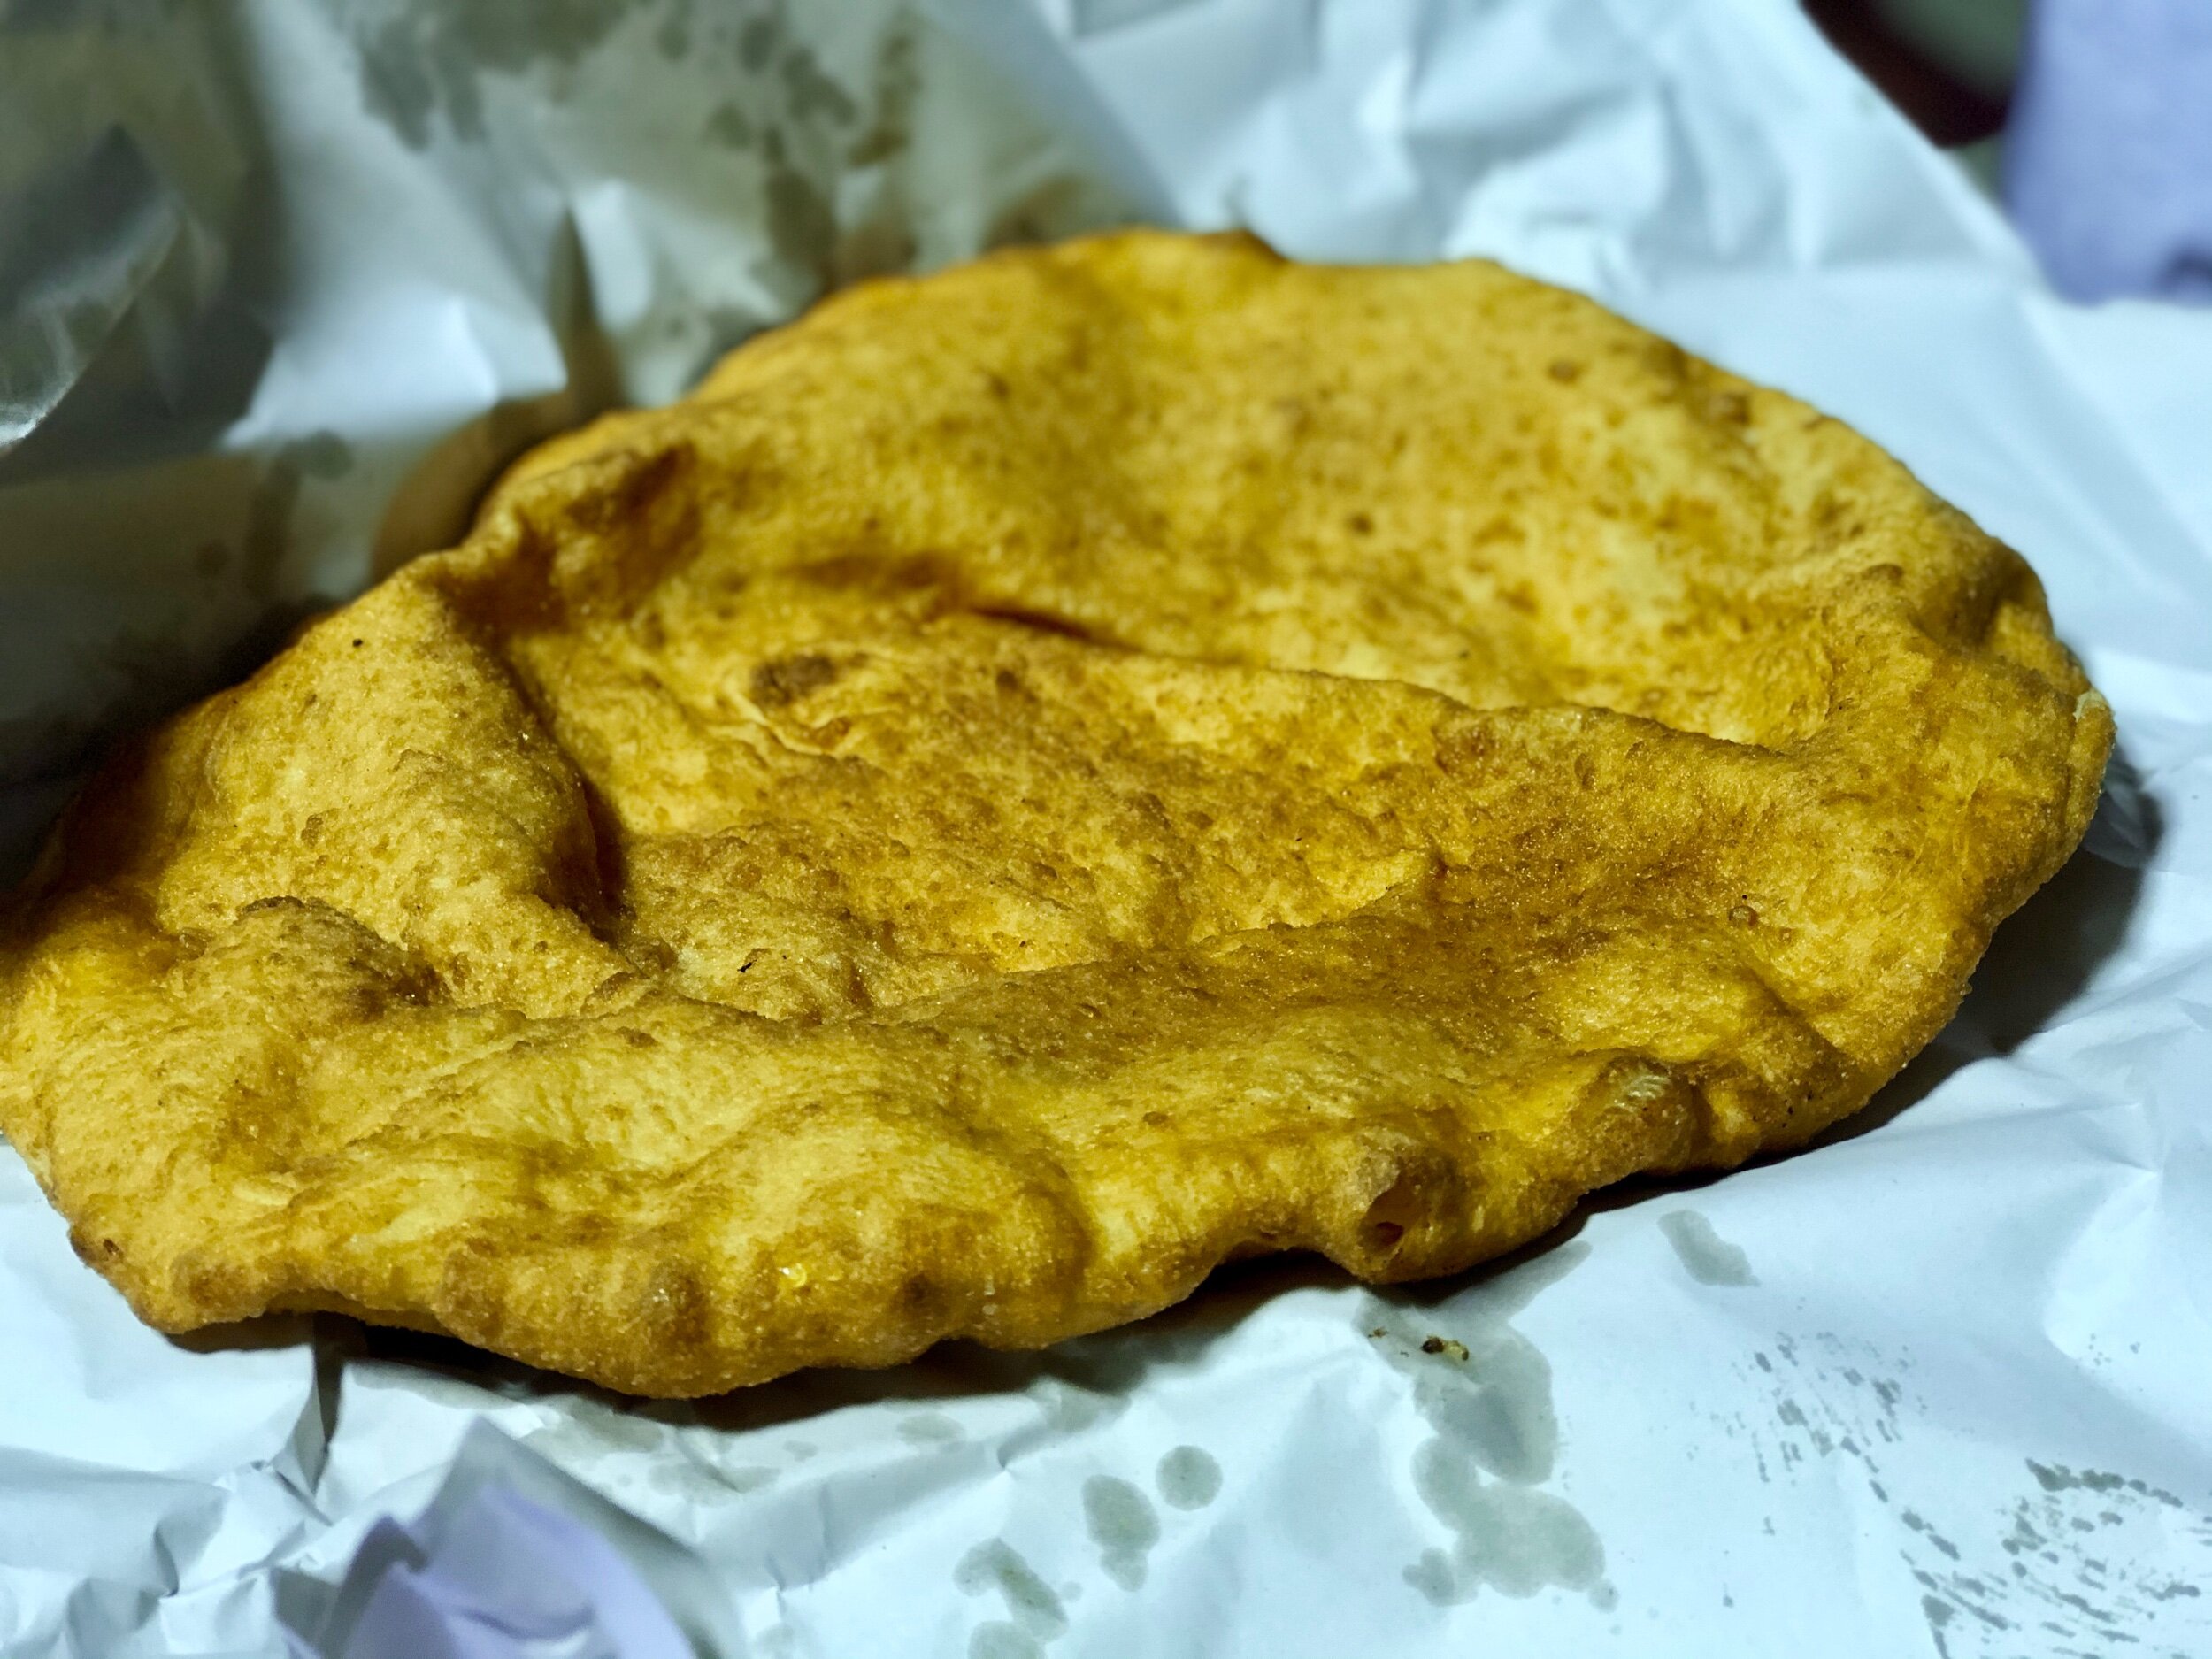  The fried pizza, usually stuffed with tomato, ricotta, mozzarella, some pork or pork fat, and seasoned with salt, pepper, and basil. 